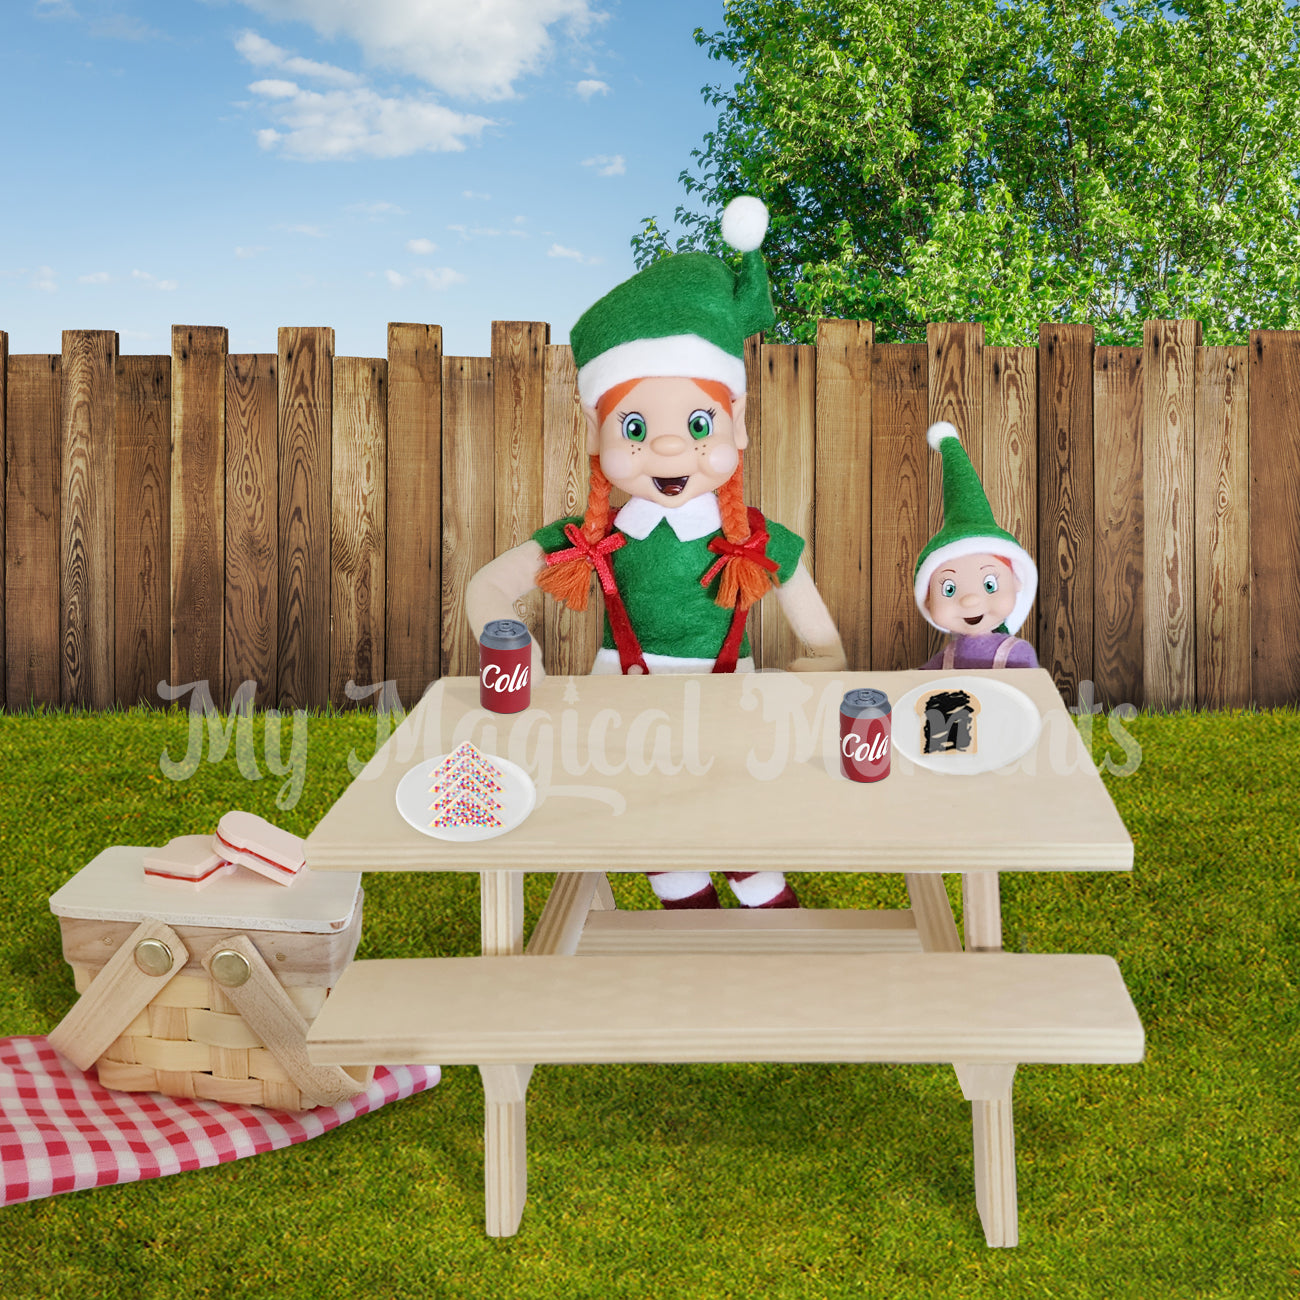 Orange hair elf sitting at miniature picnic table with elf toddler eating fairy bread, vegemite, with a picnic basket and tiny cola cans